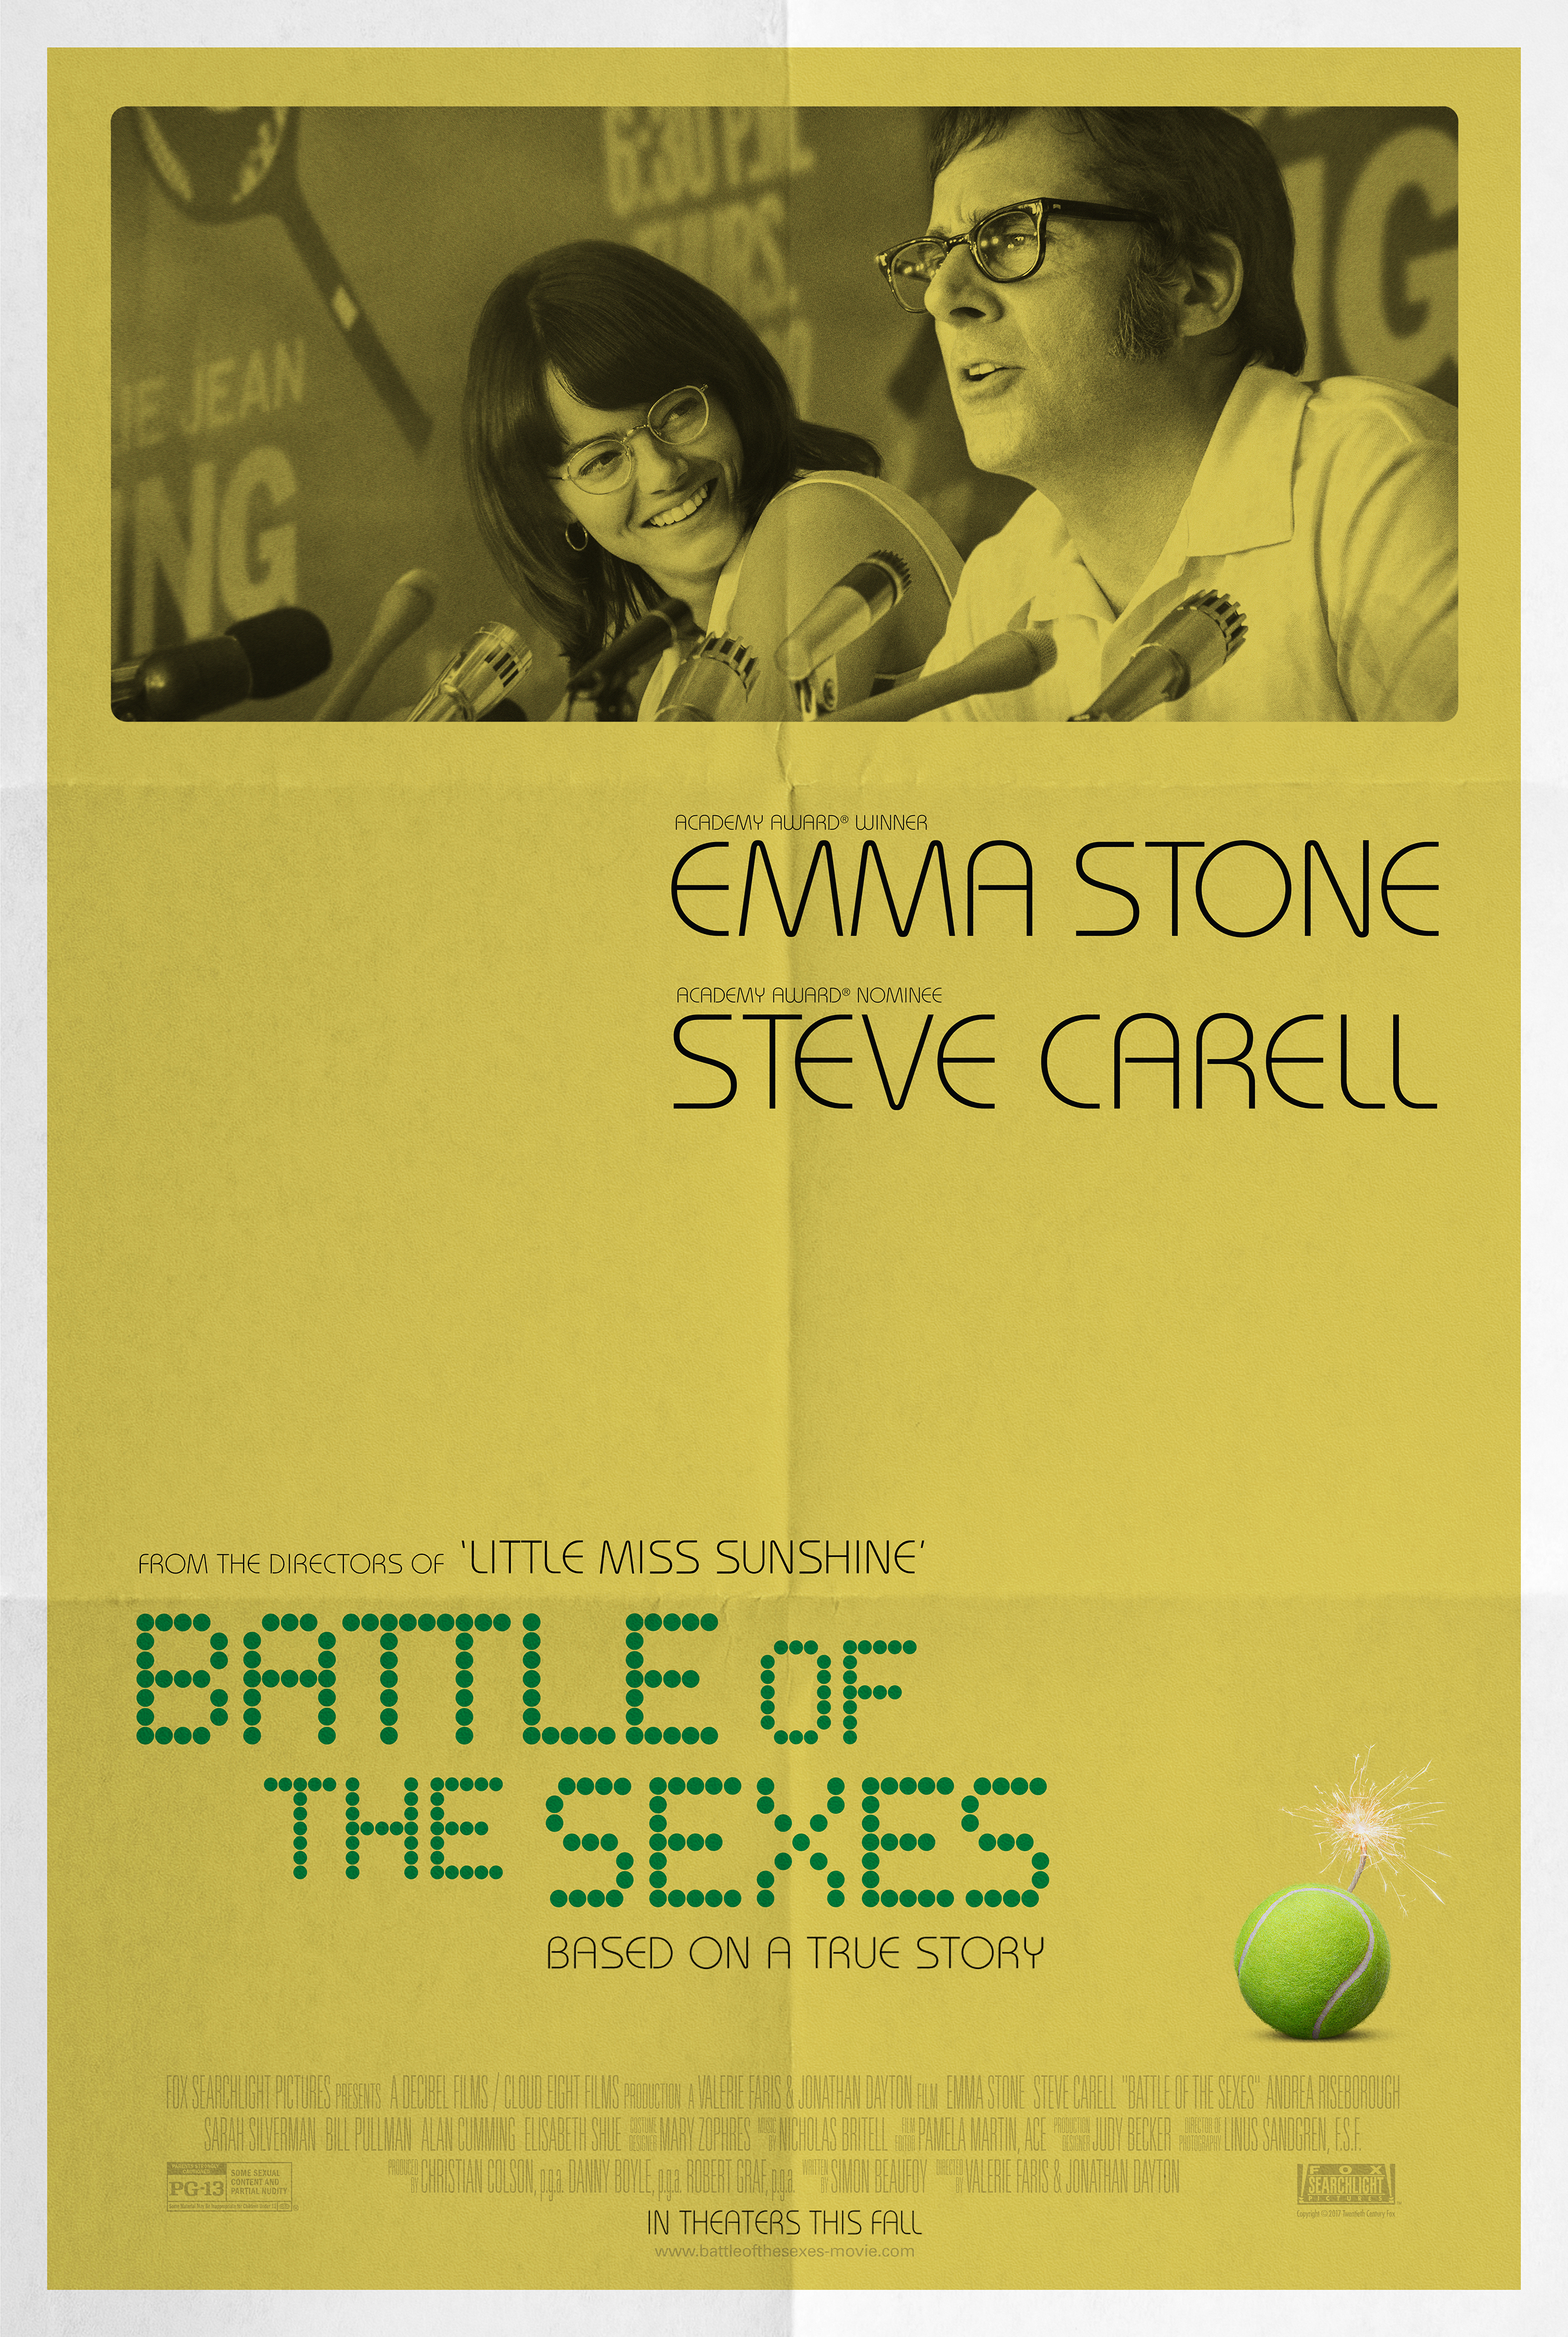 Battle Of the Sexes